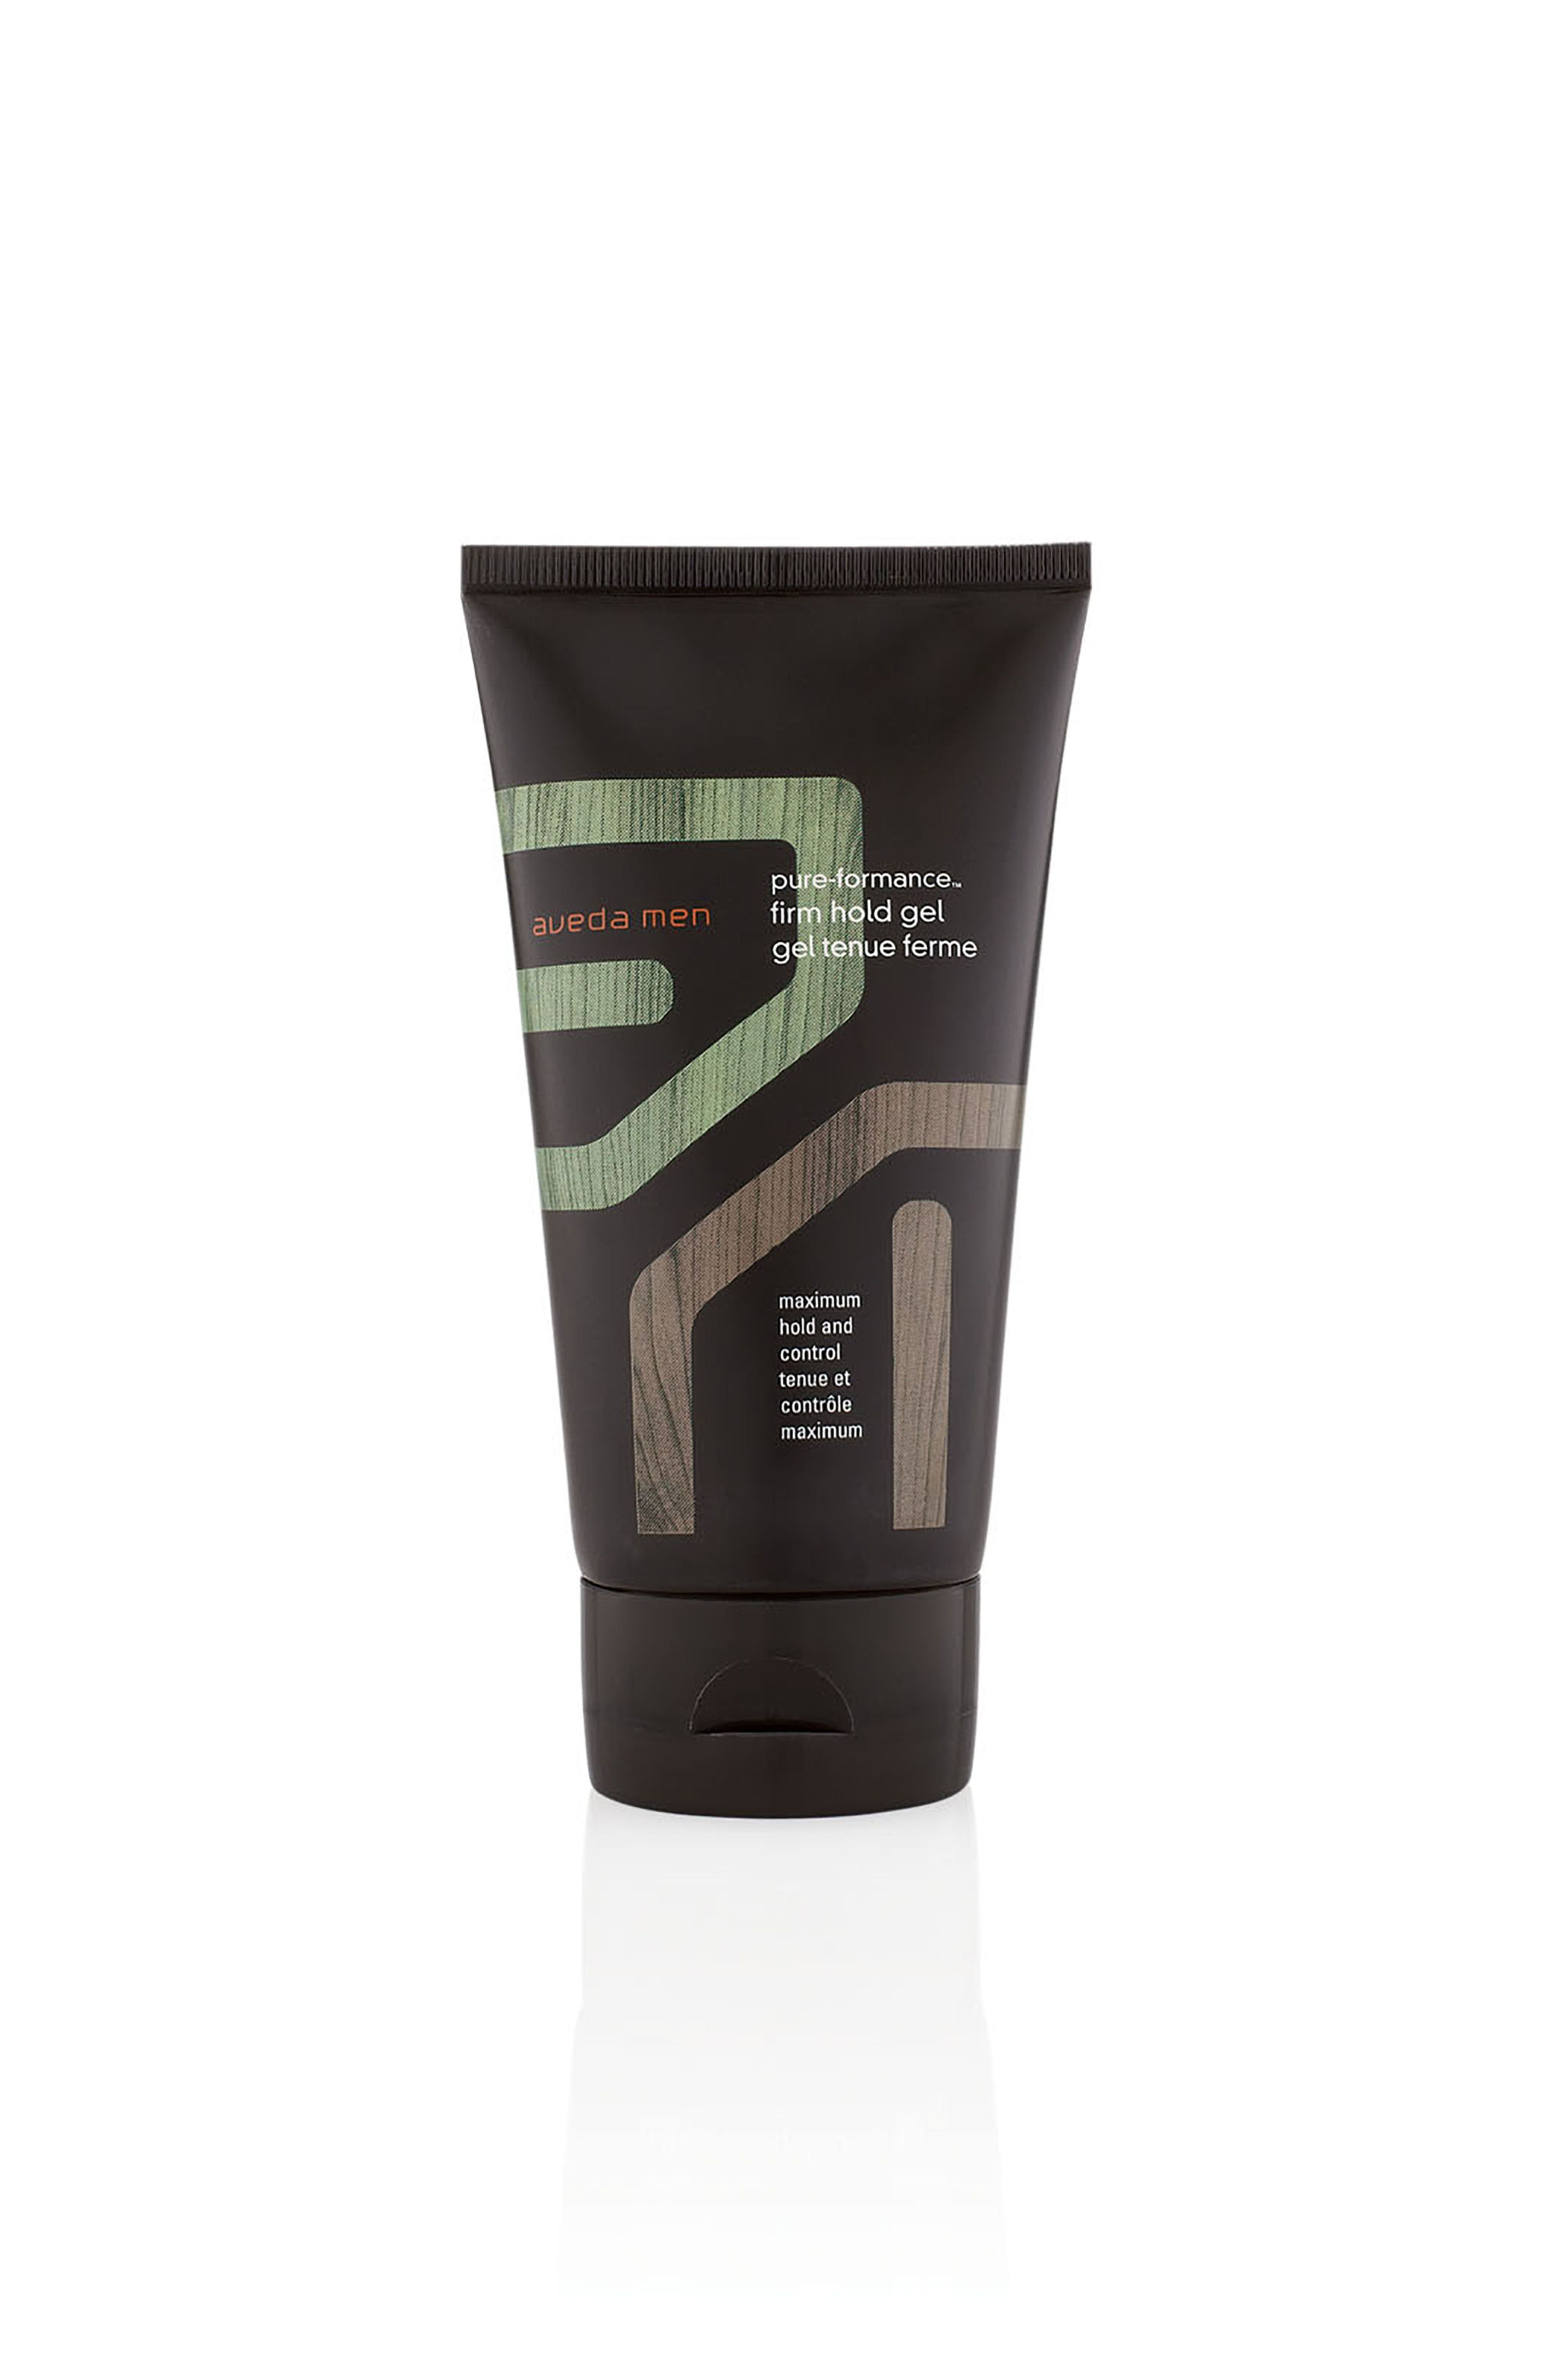 Aveda Men Pure-formance Firm Hold Gel 1